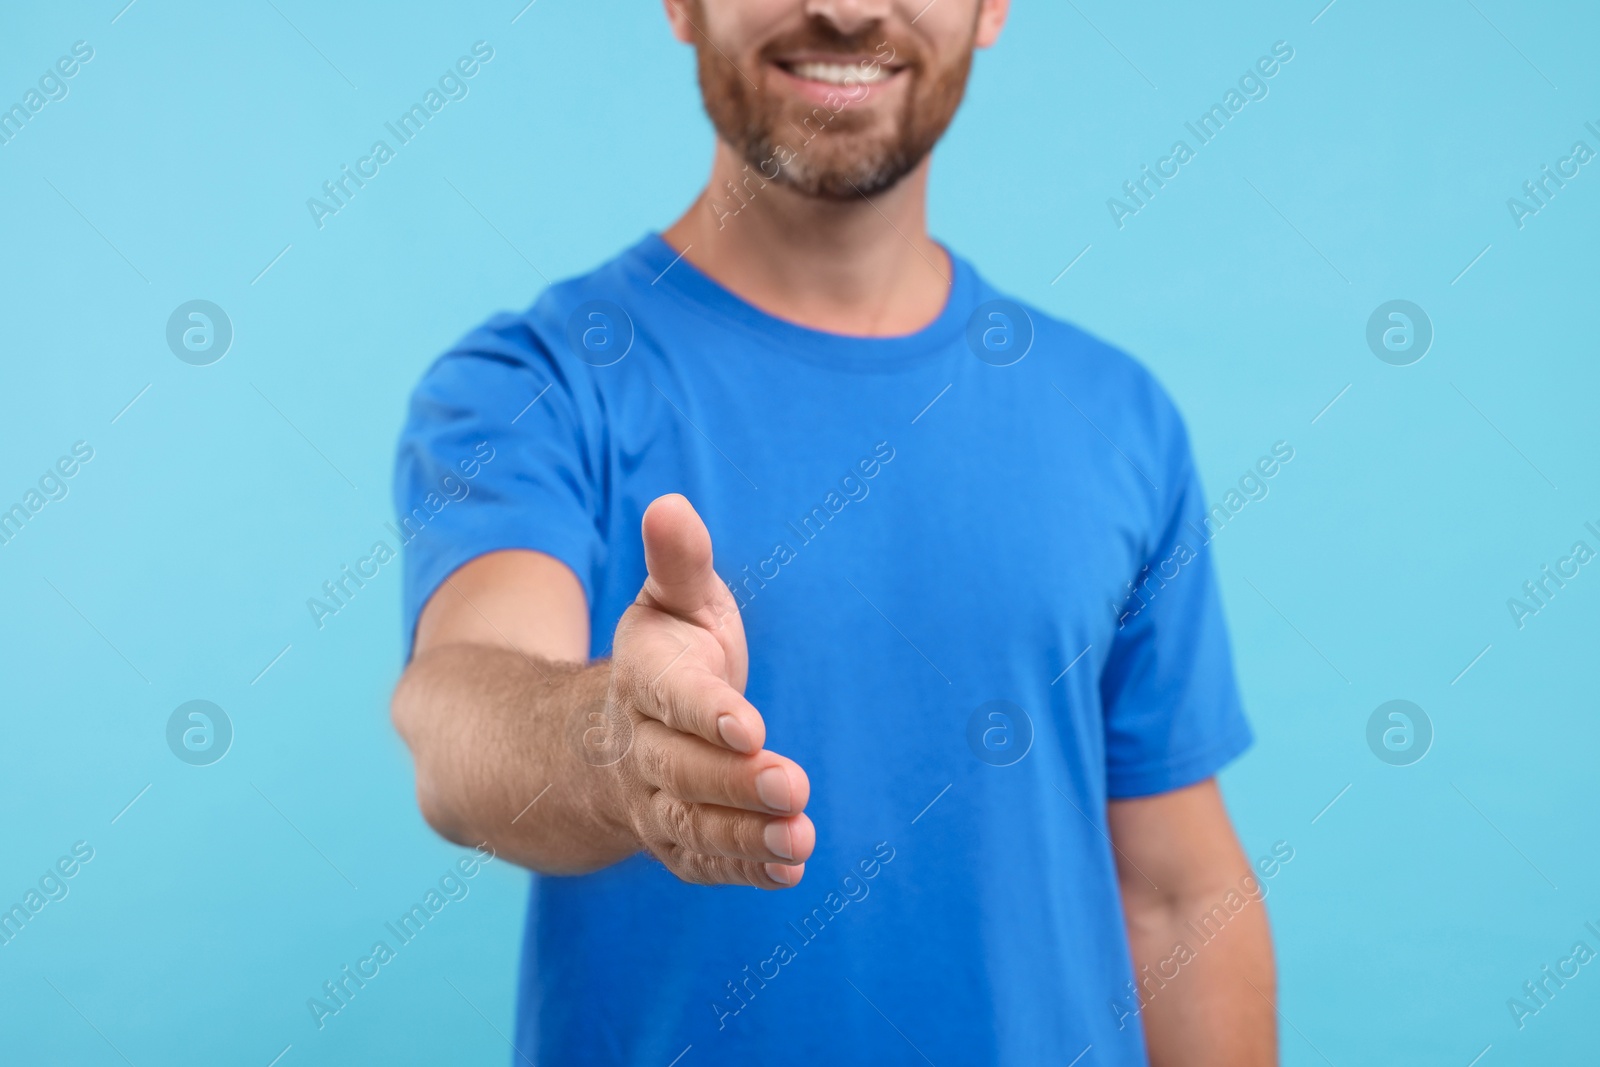 Photo of Man welcoming and offering handshake on light blue background, closeup